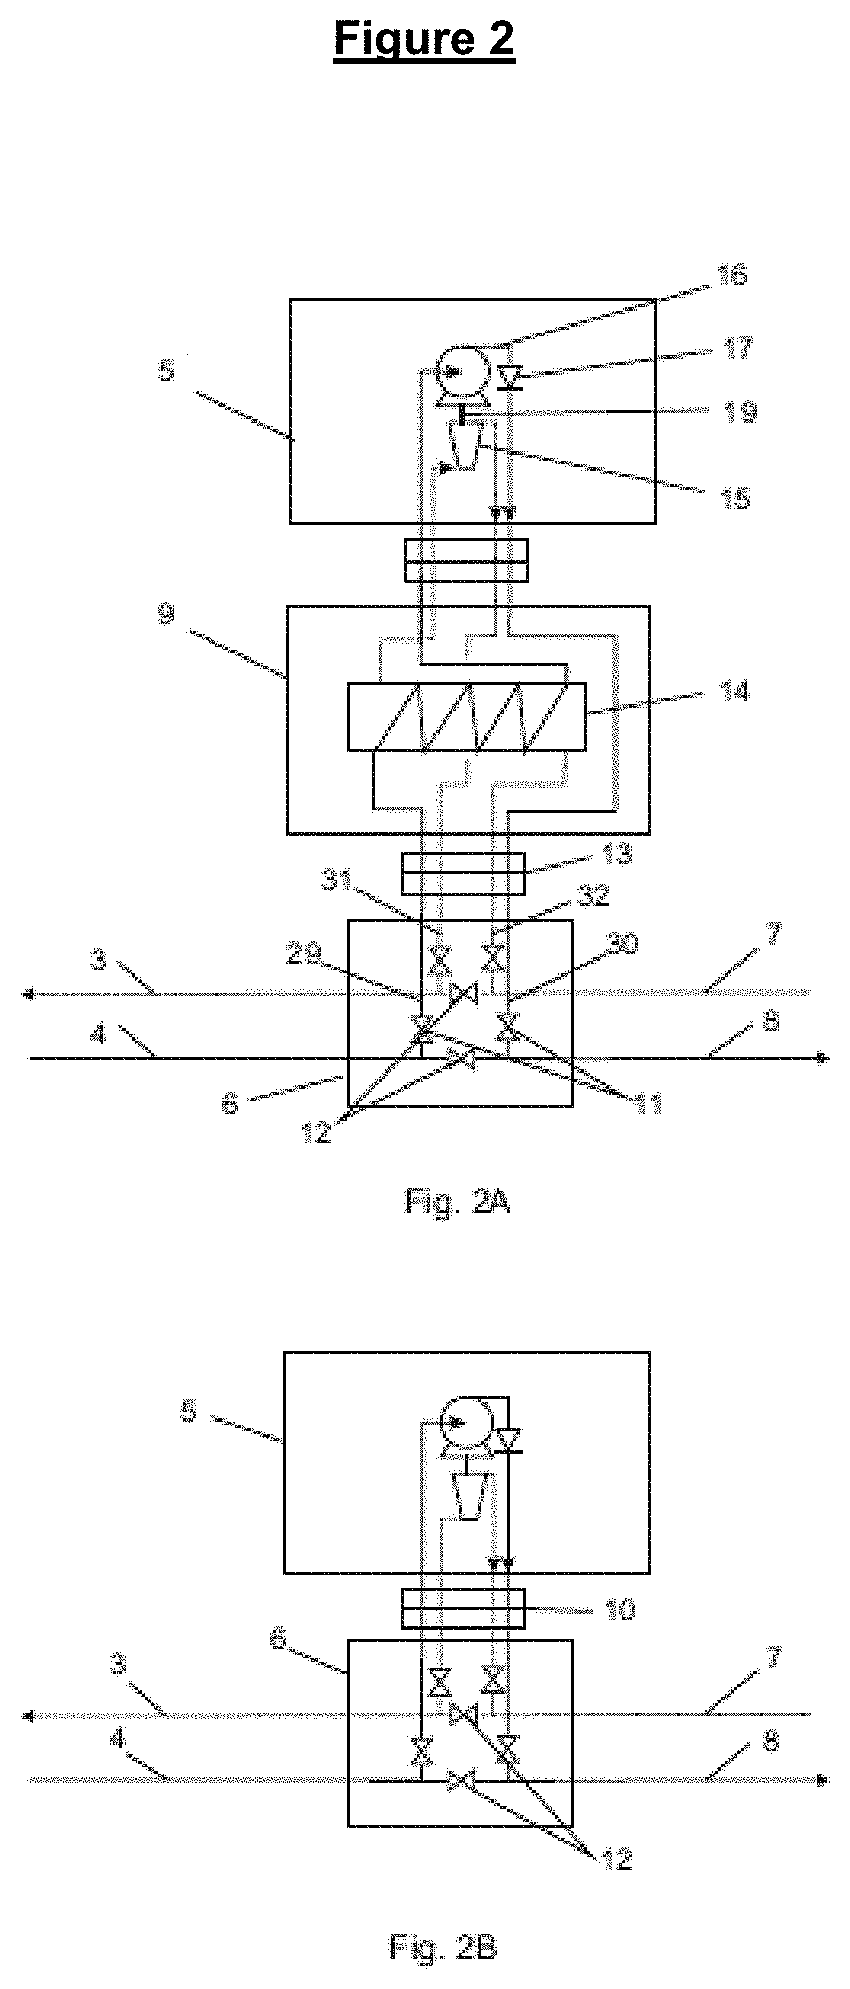 Integrated system for subsea heating and pumping of oil and water injection for reservoir pressurization, and method of heating, of subsea pumping hydraulically actuated and water injection